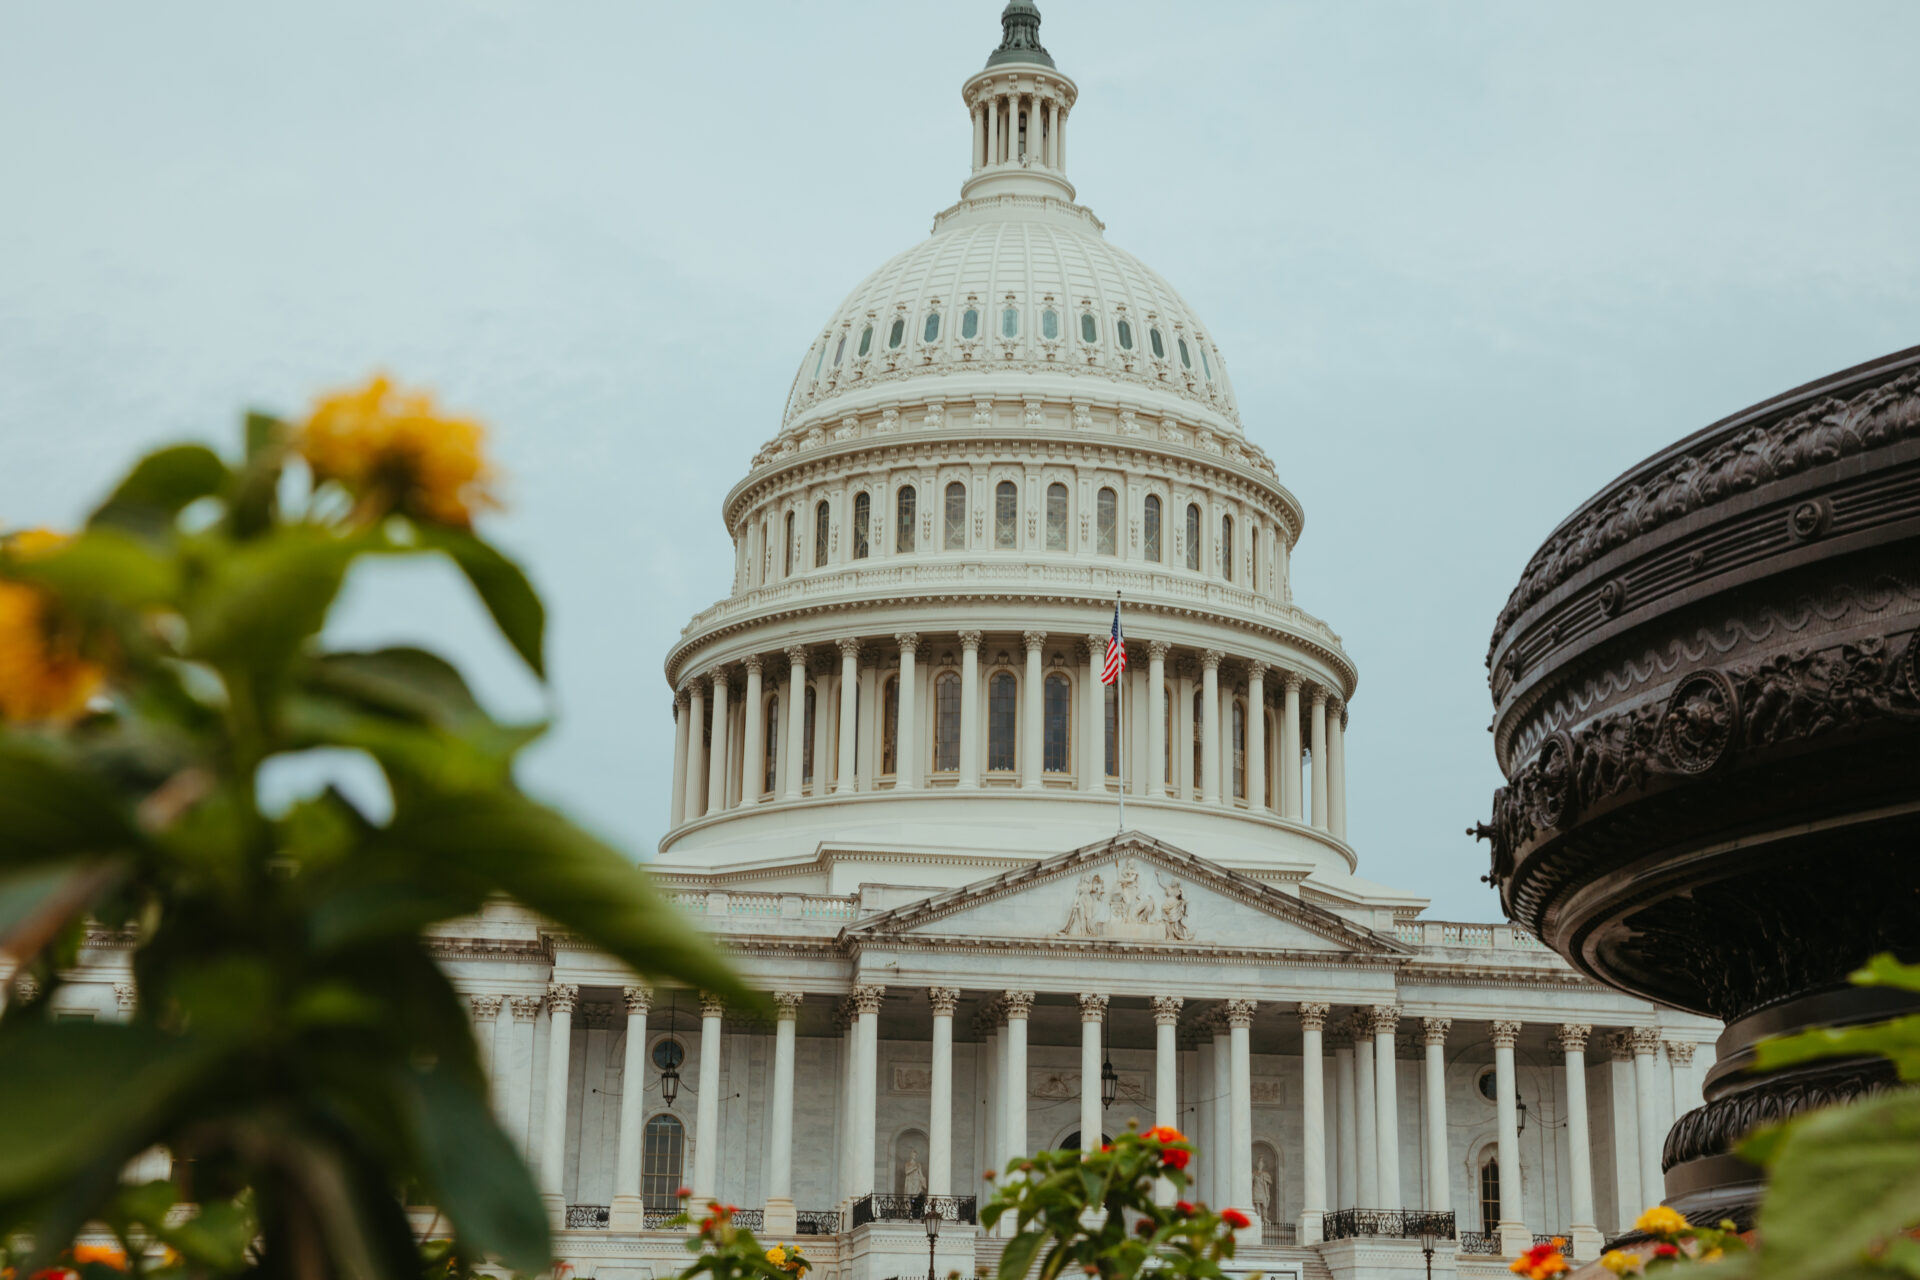 Capitol dome surrounded by flowers